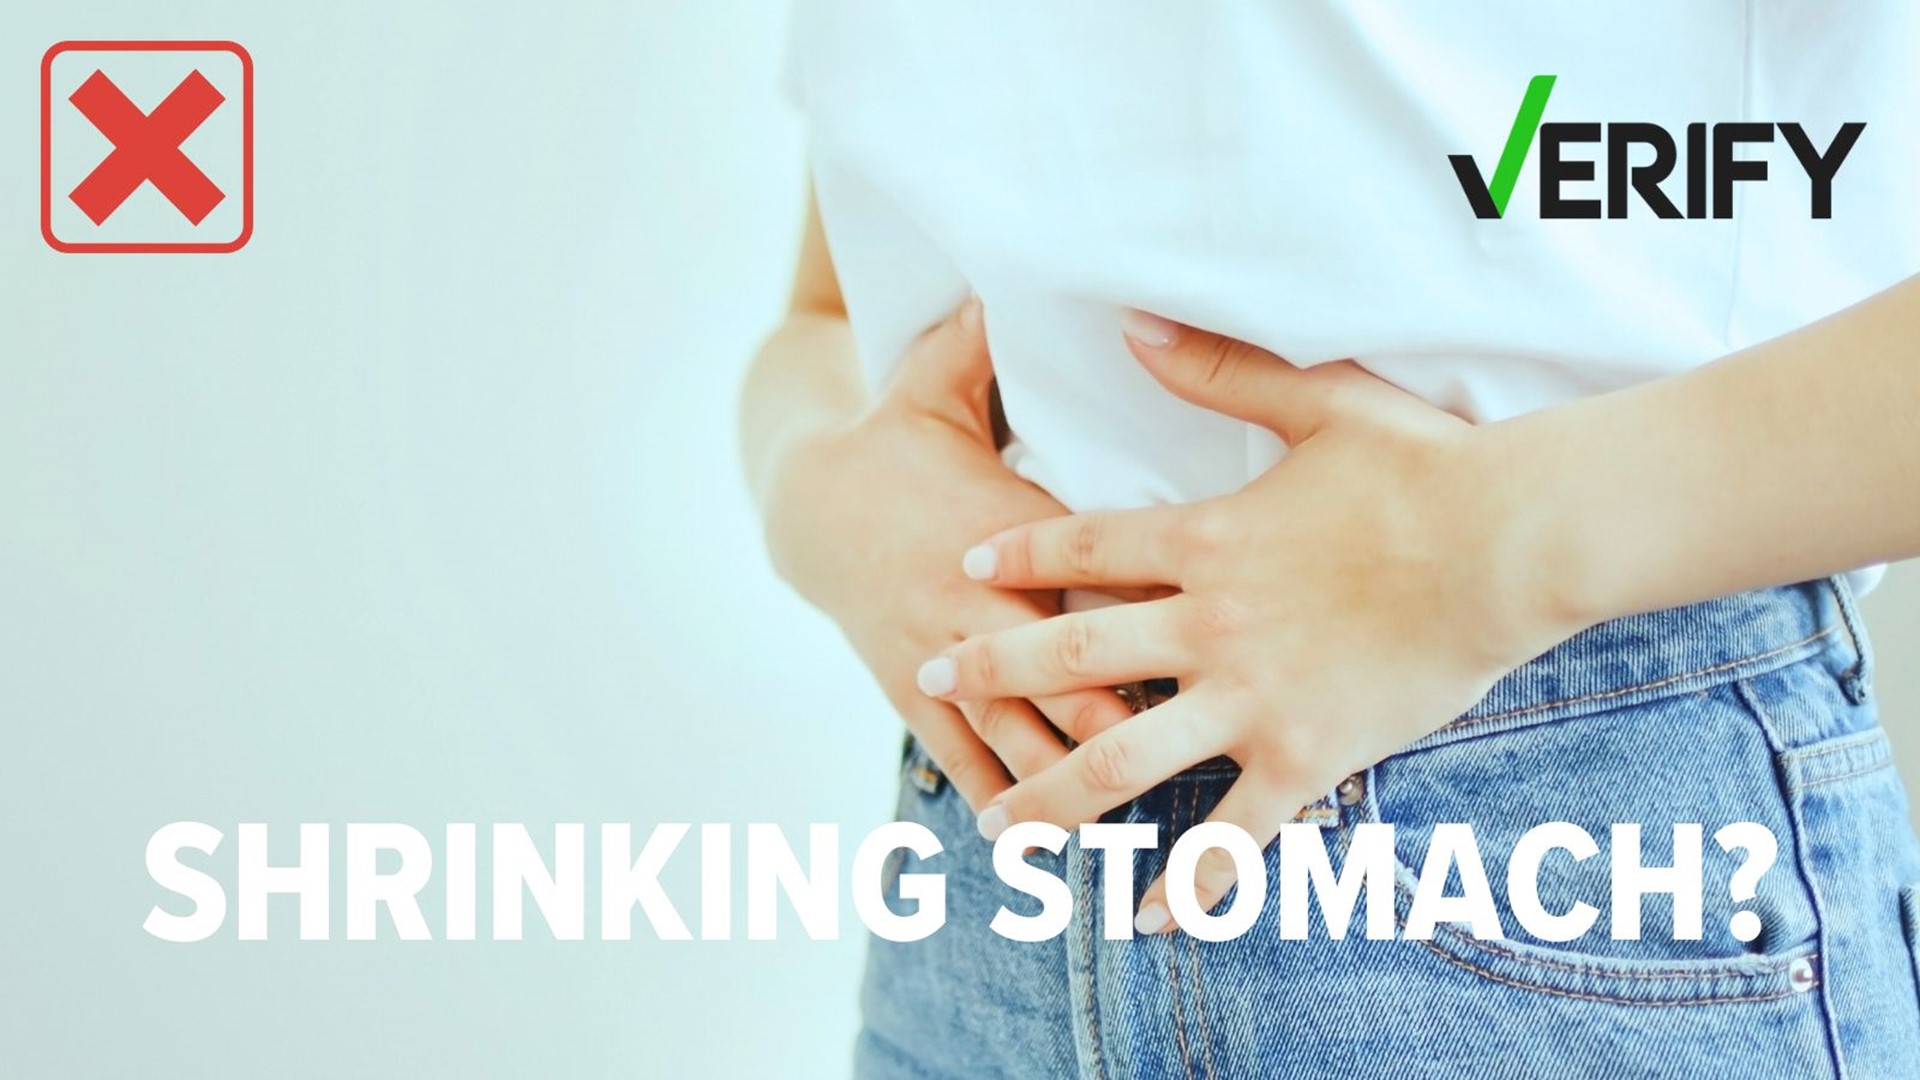 Does someone's stomach actually shrink if they eat less? It sounds straightforward and has been accepted for years, but is it true?